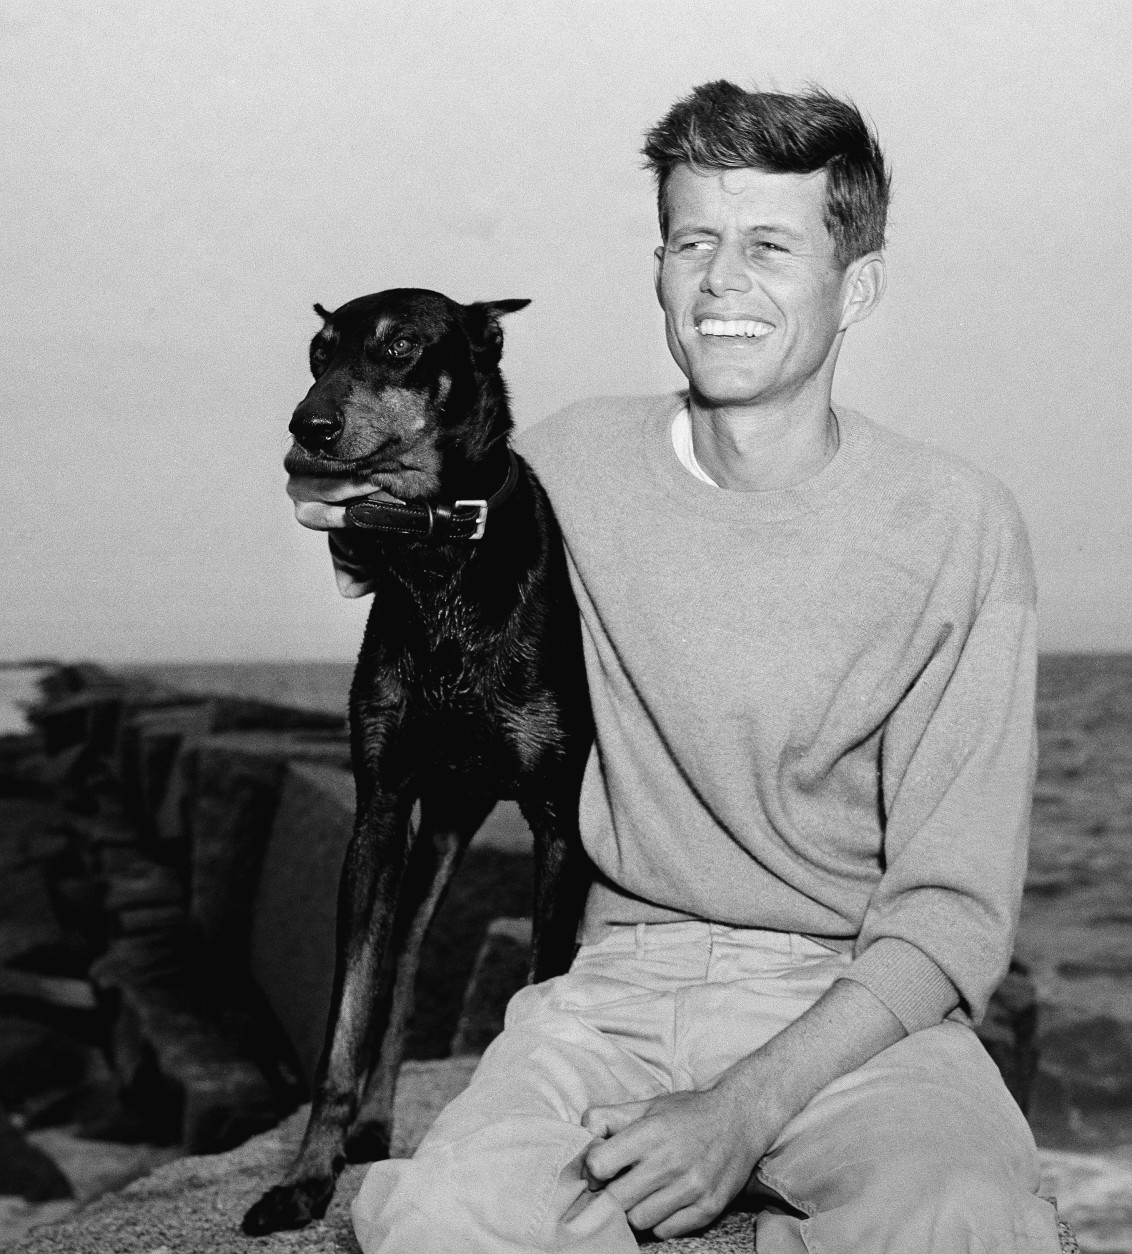 John F. Kennedy, winner of the Democratic Nomination for Congress in the 11th Massachusetts District, relaxes with his dog, Mo, June 22, 1946, Hyannisport, Mass. (AP Photo/Peter J. Carroll)